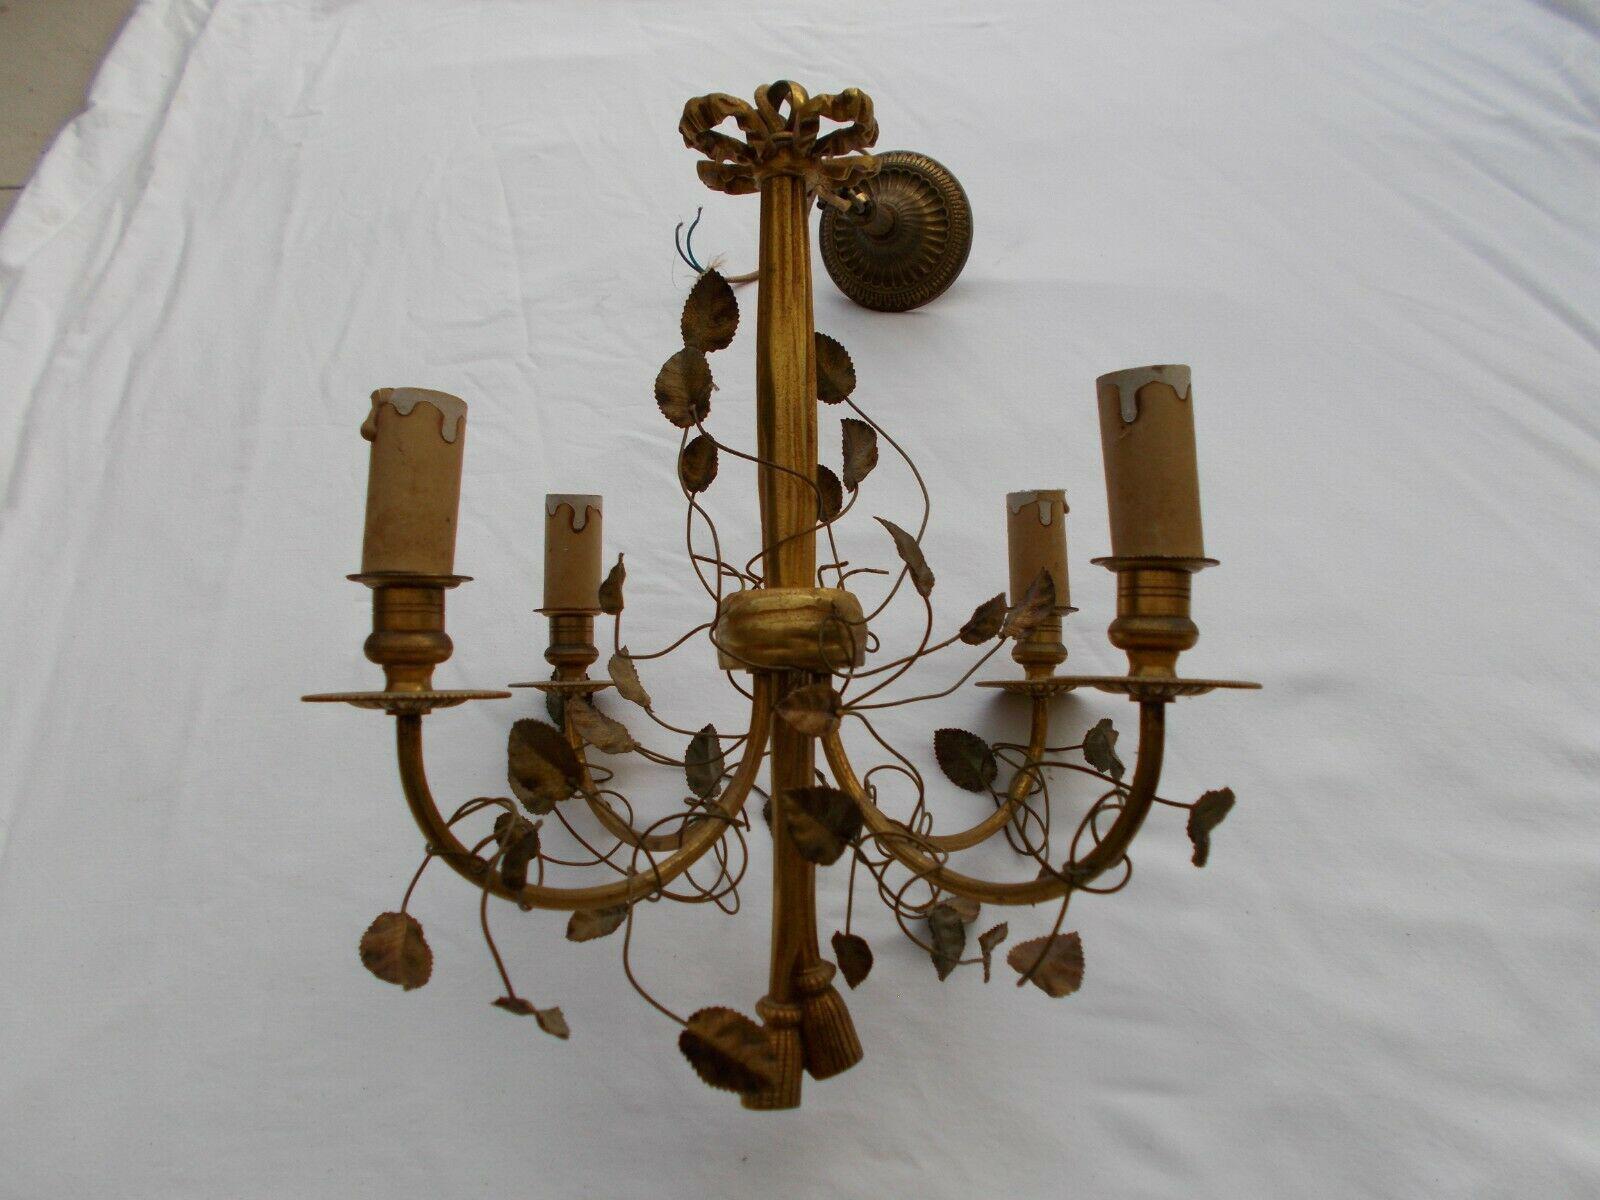 1910 Antique French Louis XVI style Bronze Floral/ Faux Draped Fabric Chandelier For Sale 4